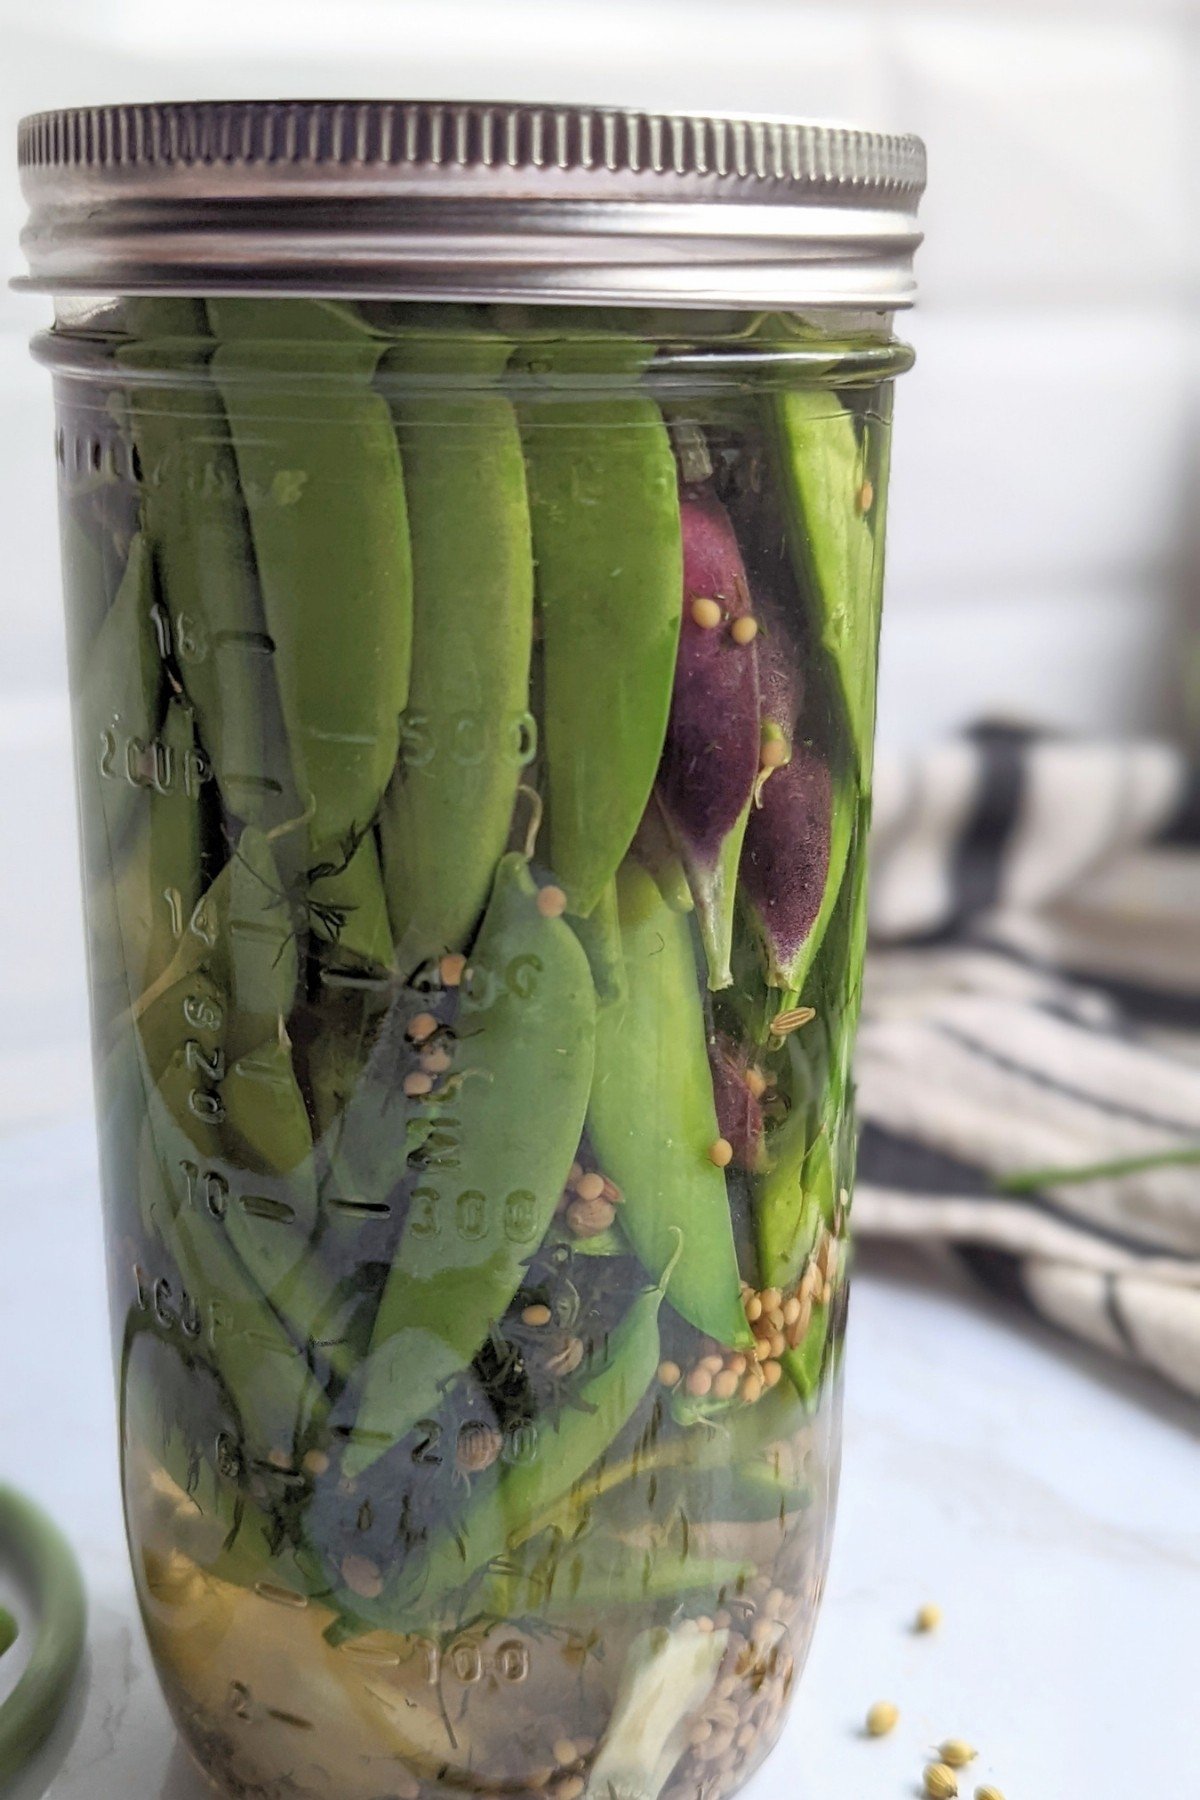 easy pickled sugar snap pea pickles recipe with dill cumin seed mustard seed dill seed white wine vinegar and rice wine vinegar pickles healthy recipes with snap peas